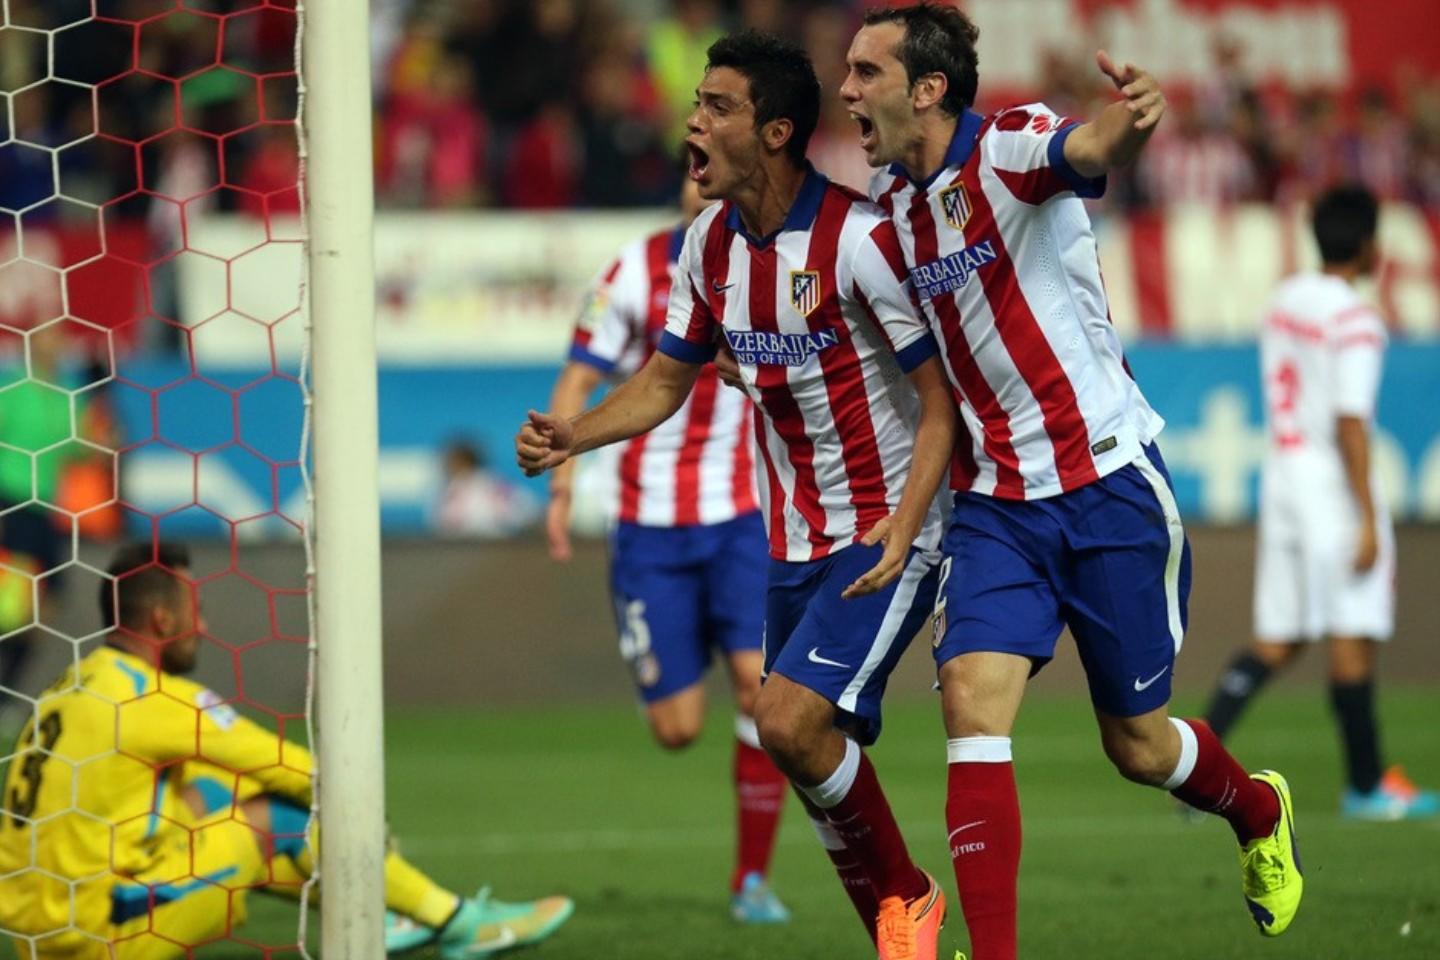 Atletico de Madrid Tickets | Buy or Sell Tickets for ...